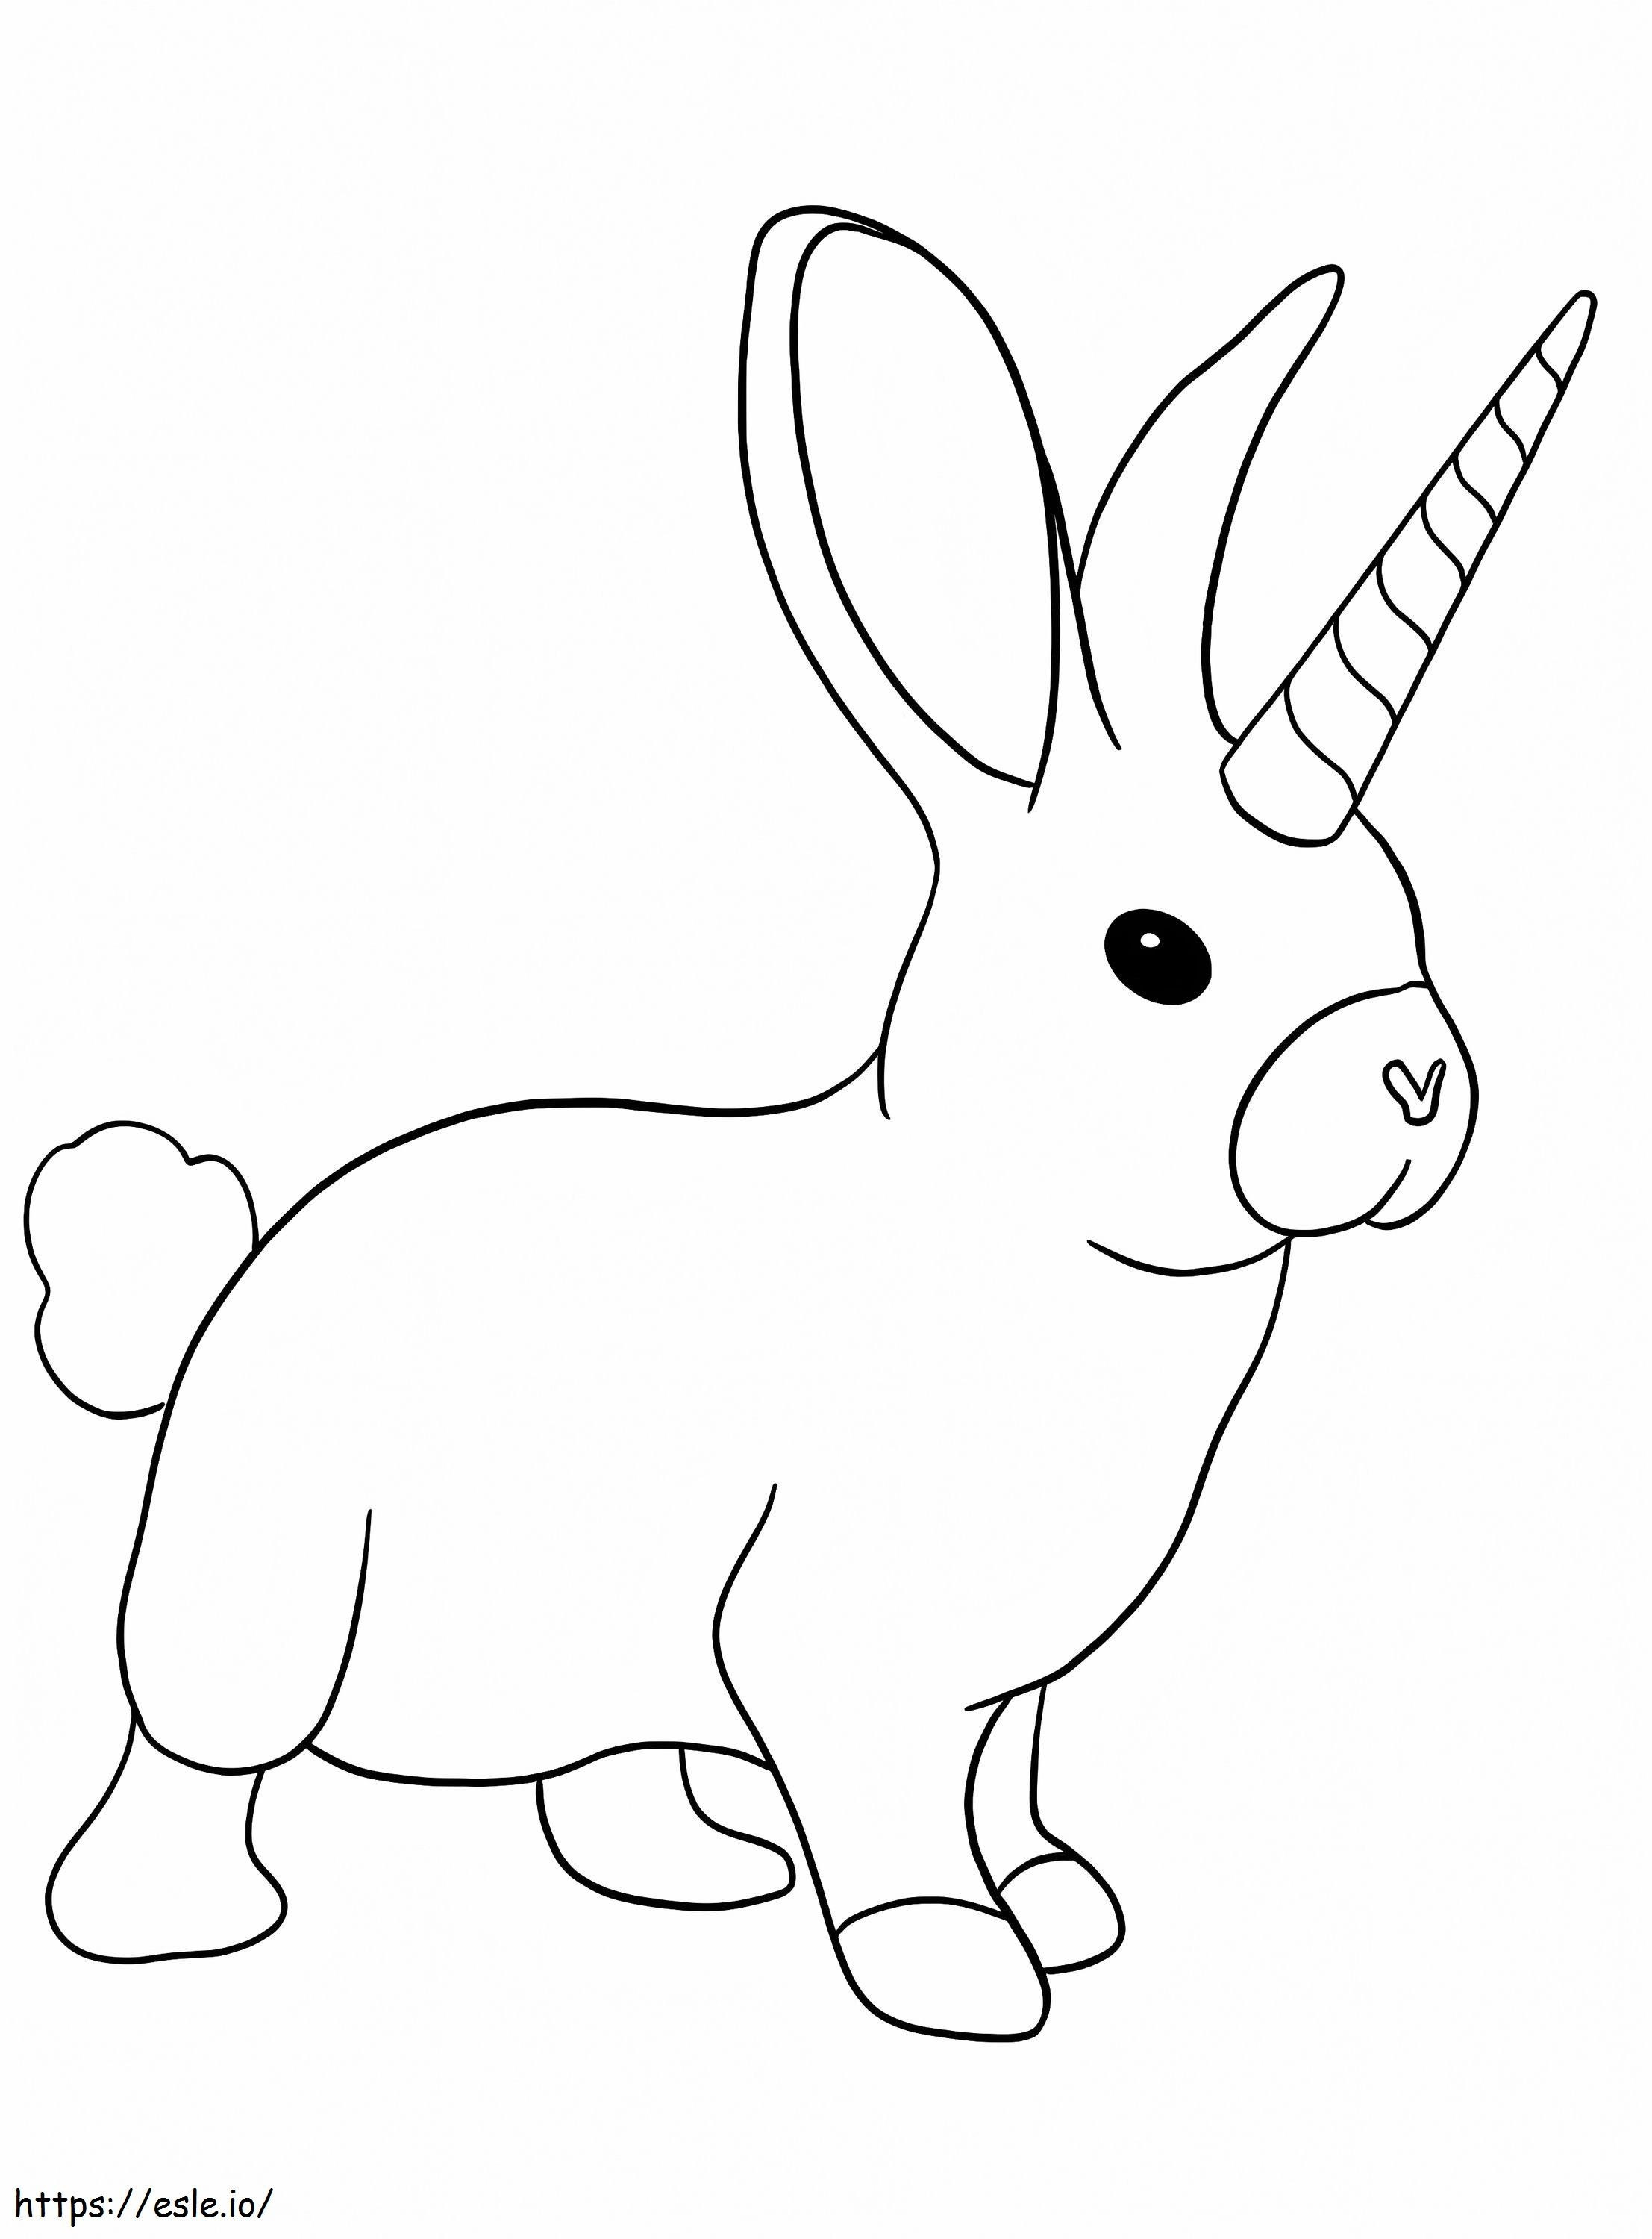 Rabbit With Horn coloring page